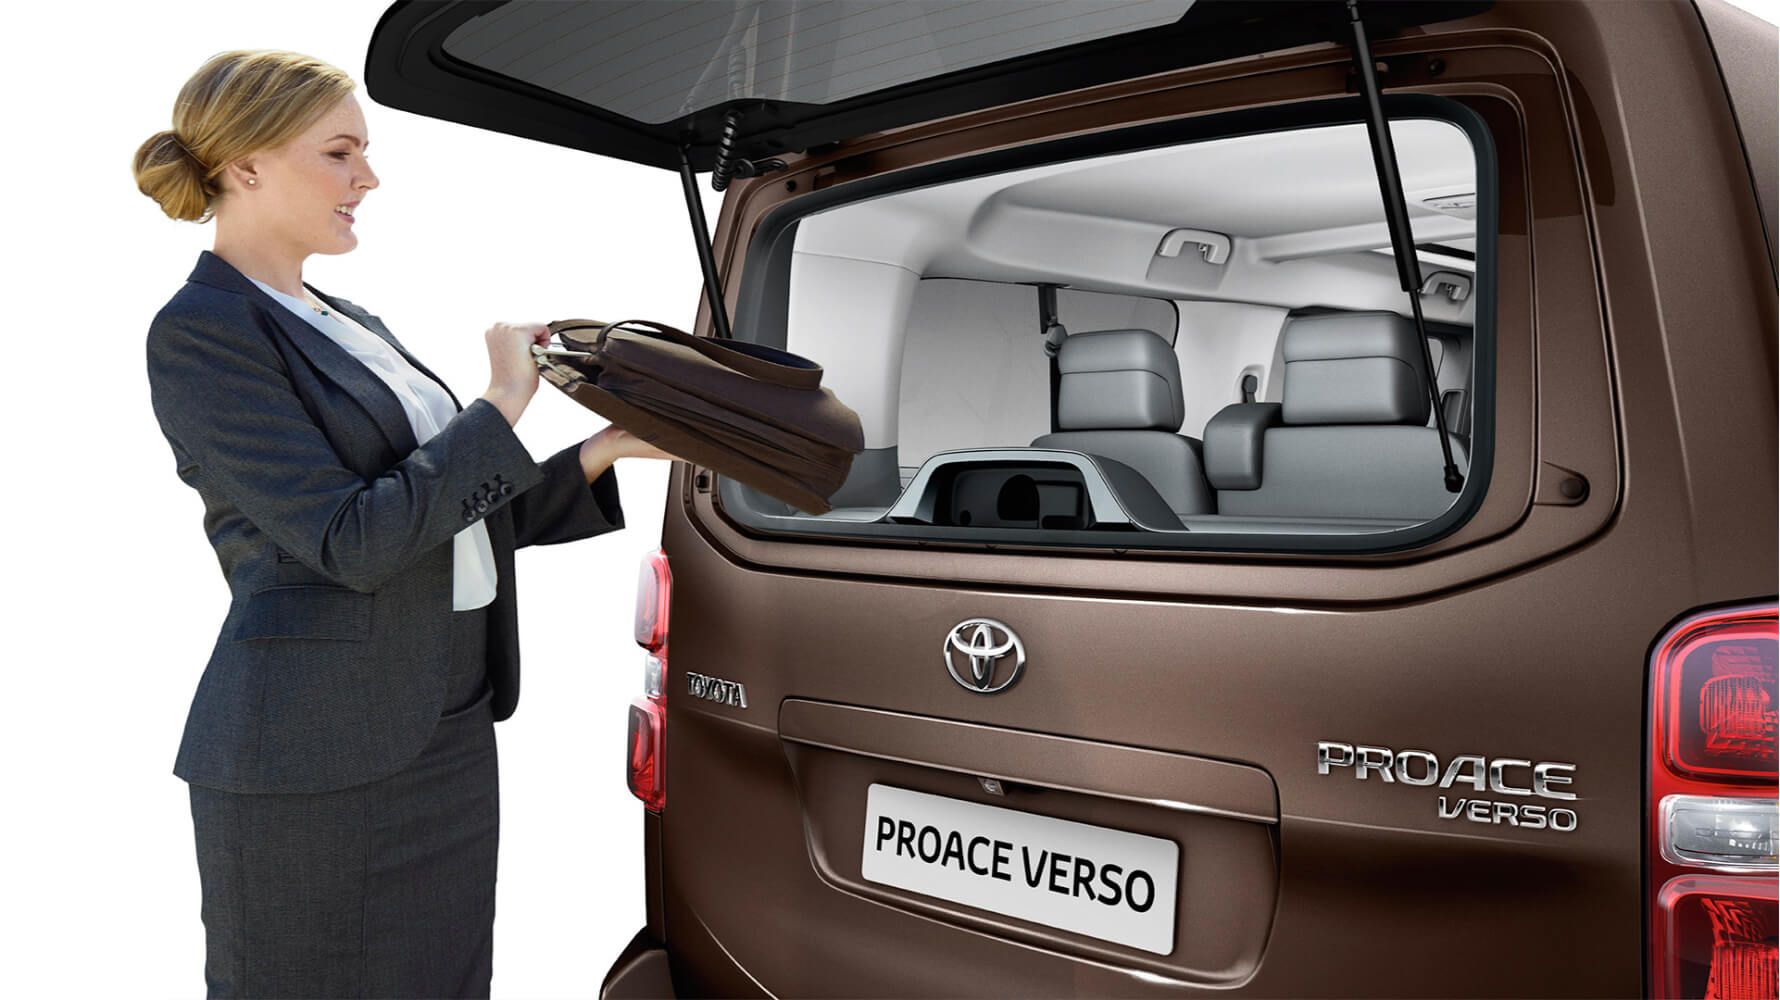 toyota_proace_verso_2019_gallery_018_full_tcm_3046_1703808